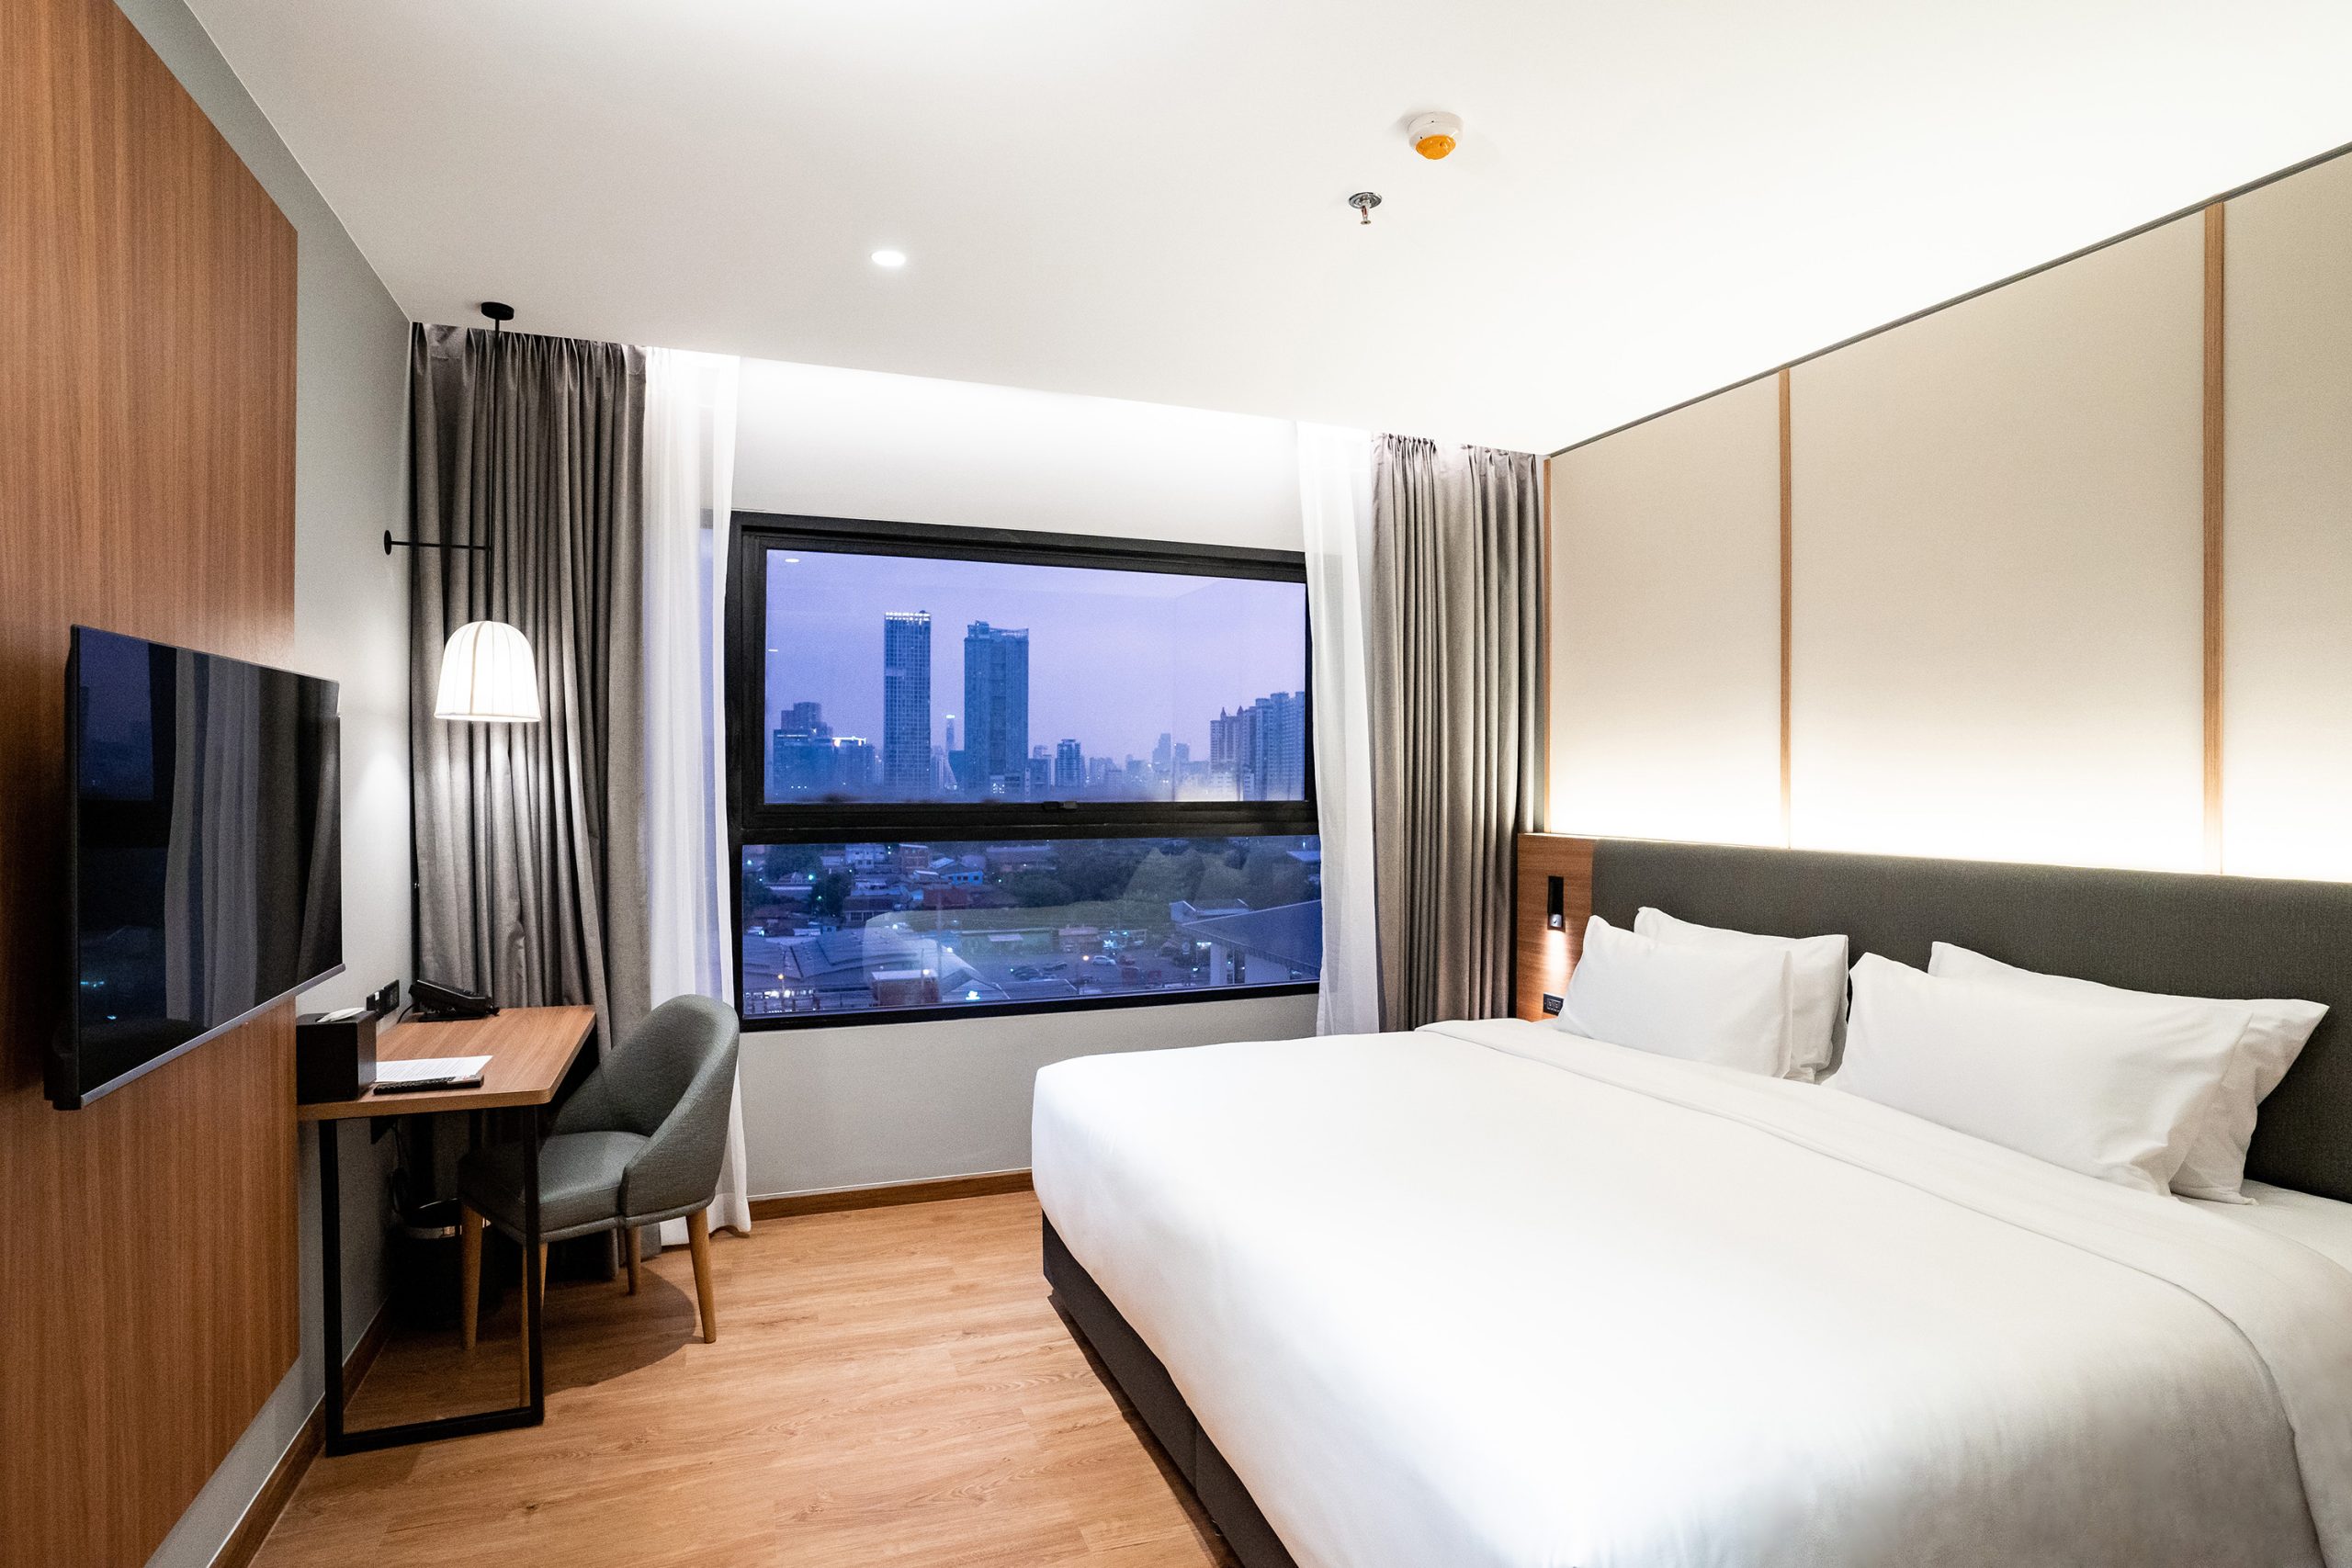 BEST WESTERN HOTELS & RESORTS EXPANDS IN BANGKOK WITH BRAND NEW HOTEL NEXT TO ICONIC CHATUCHAK MARKET